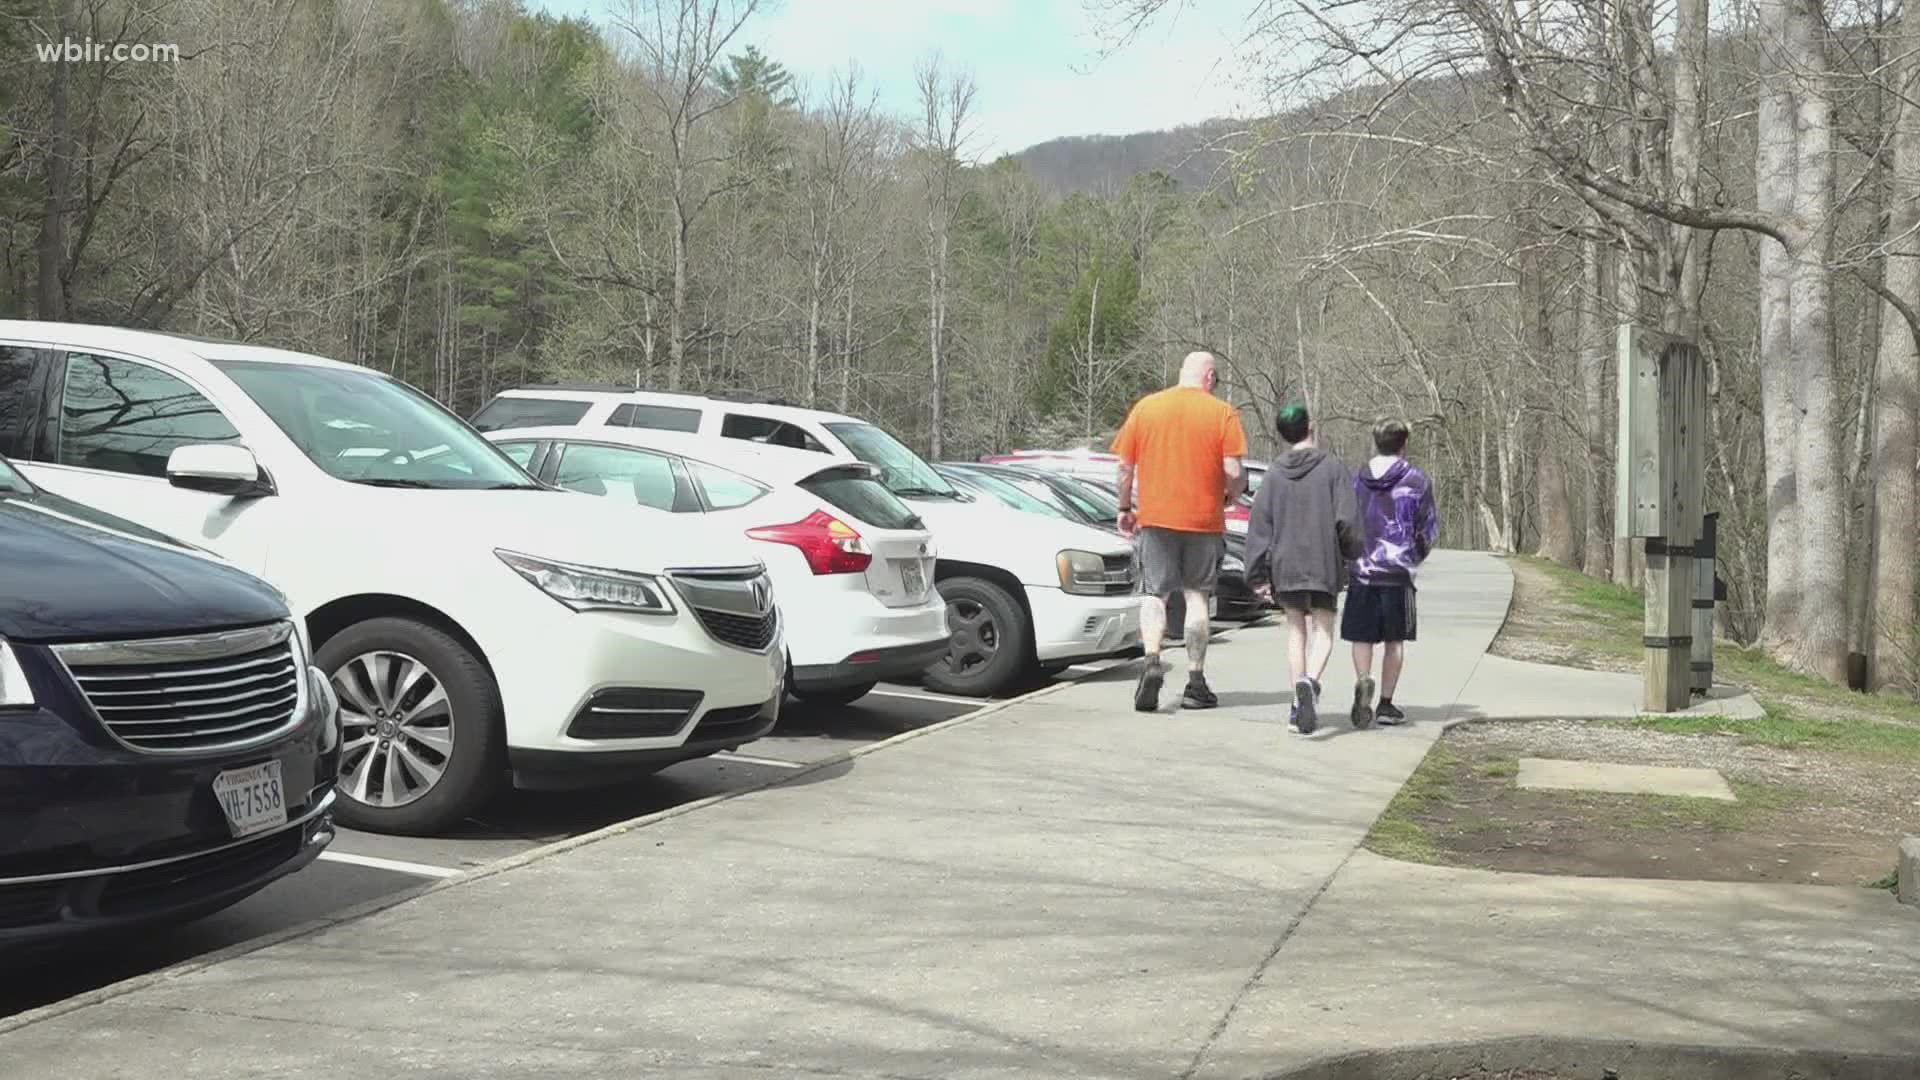 EBCI Principal Chief Richard Sneed said free parking passes will be available to tribal citizens in the Smokies when the new pay-to-park system is approved.